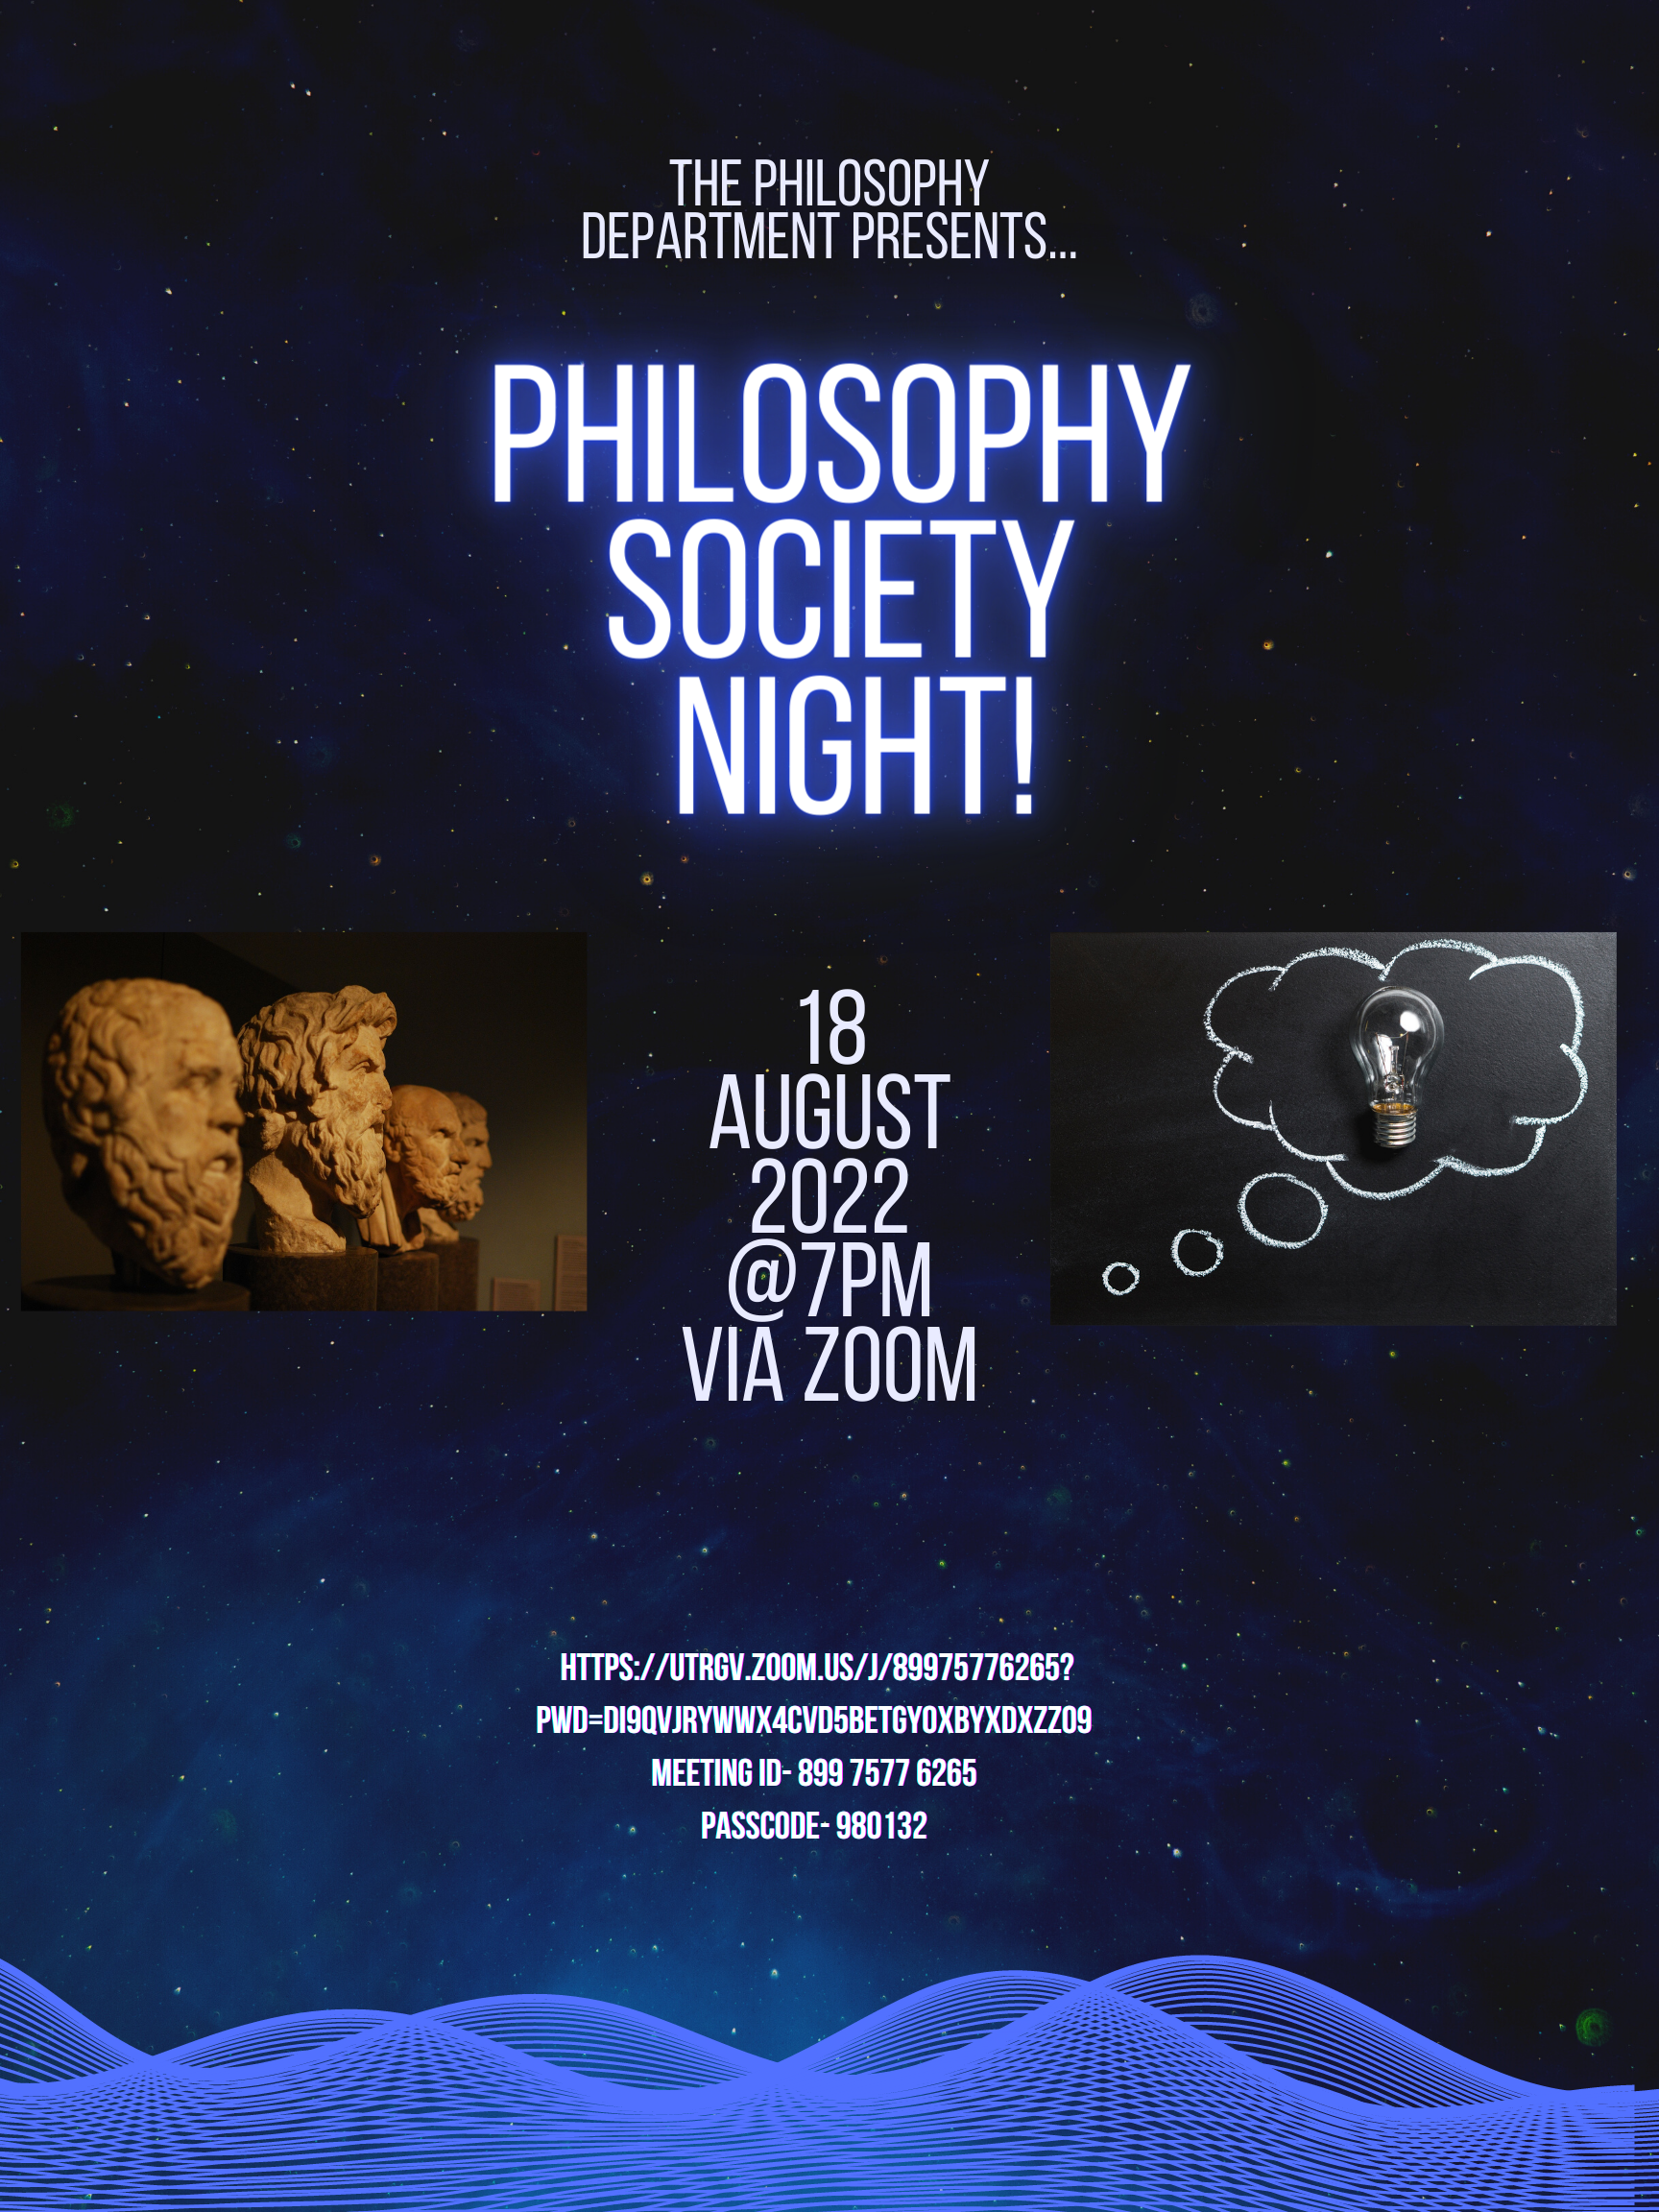 The Philosophy Department presents Philosophy Society Night!